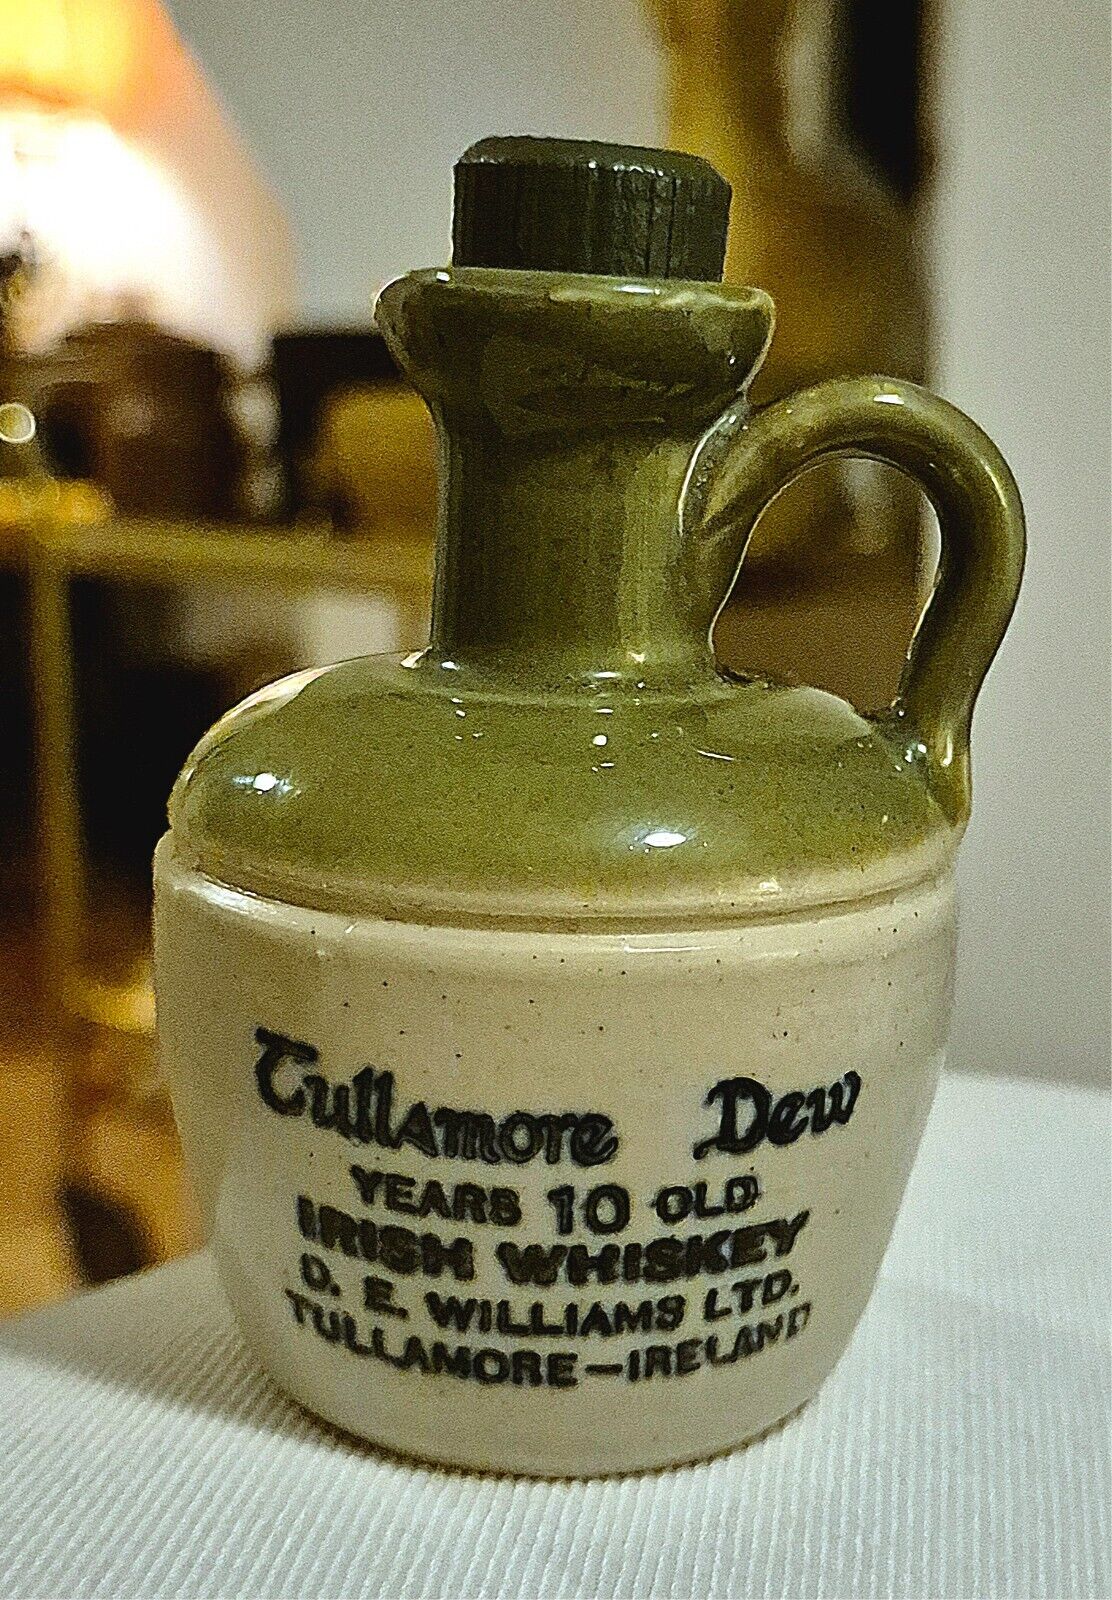 Very Rare Tullamore Dew small vintage bottle.